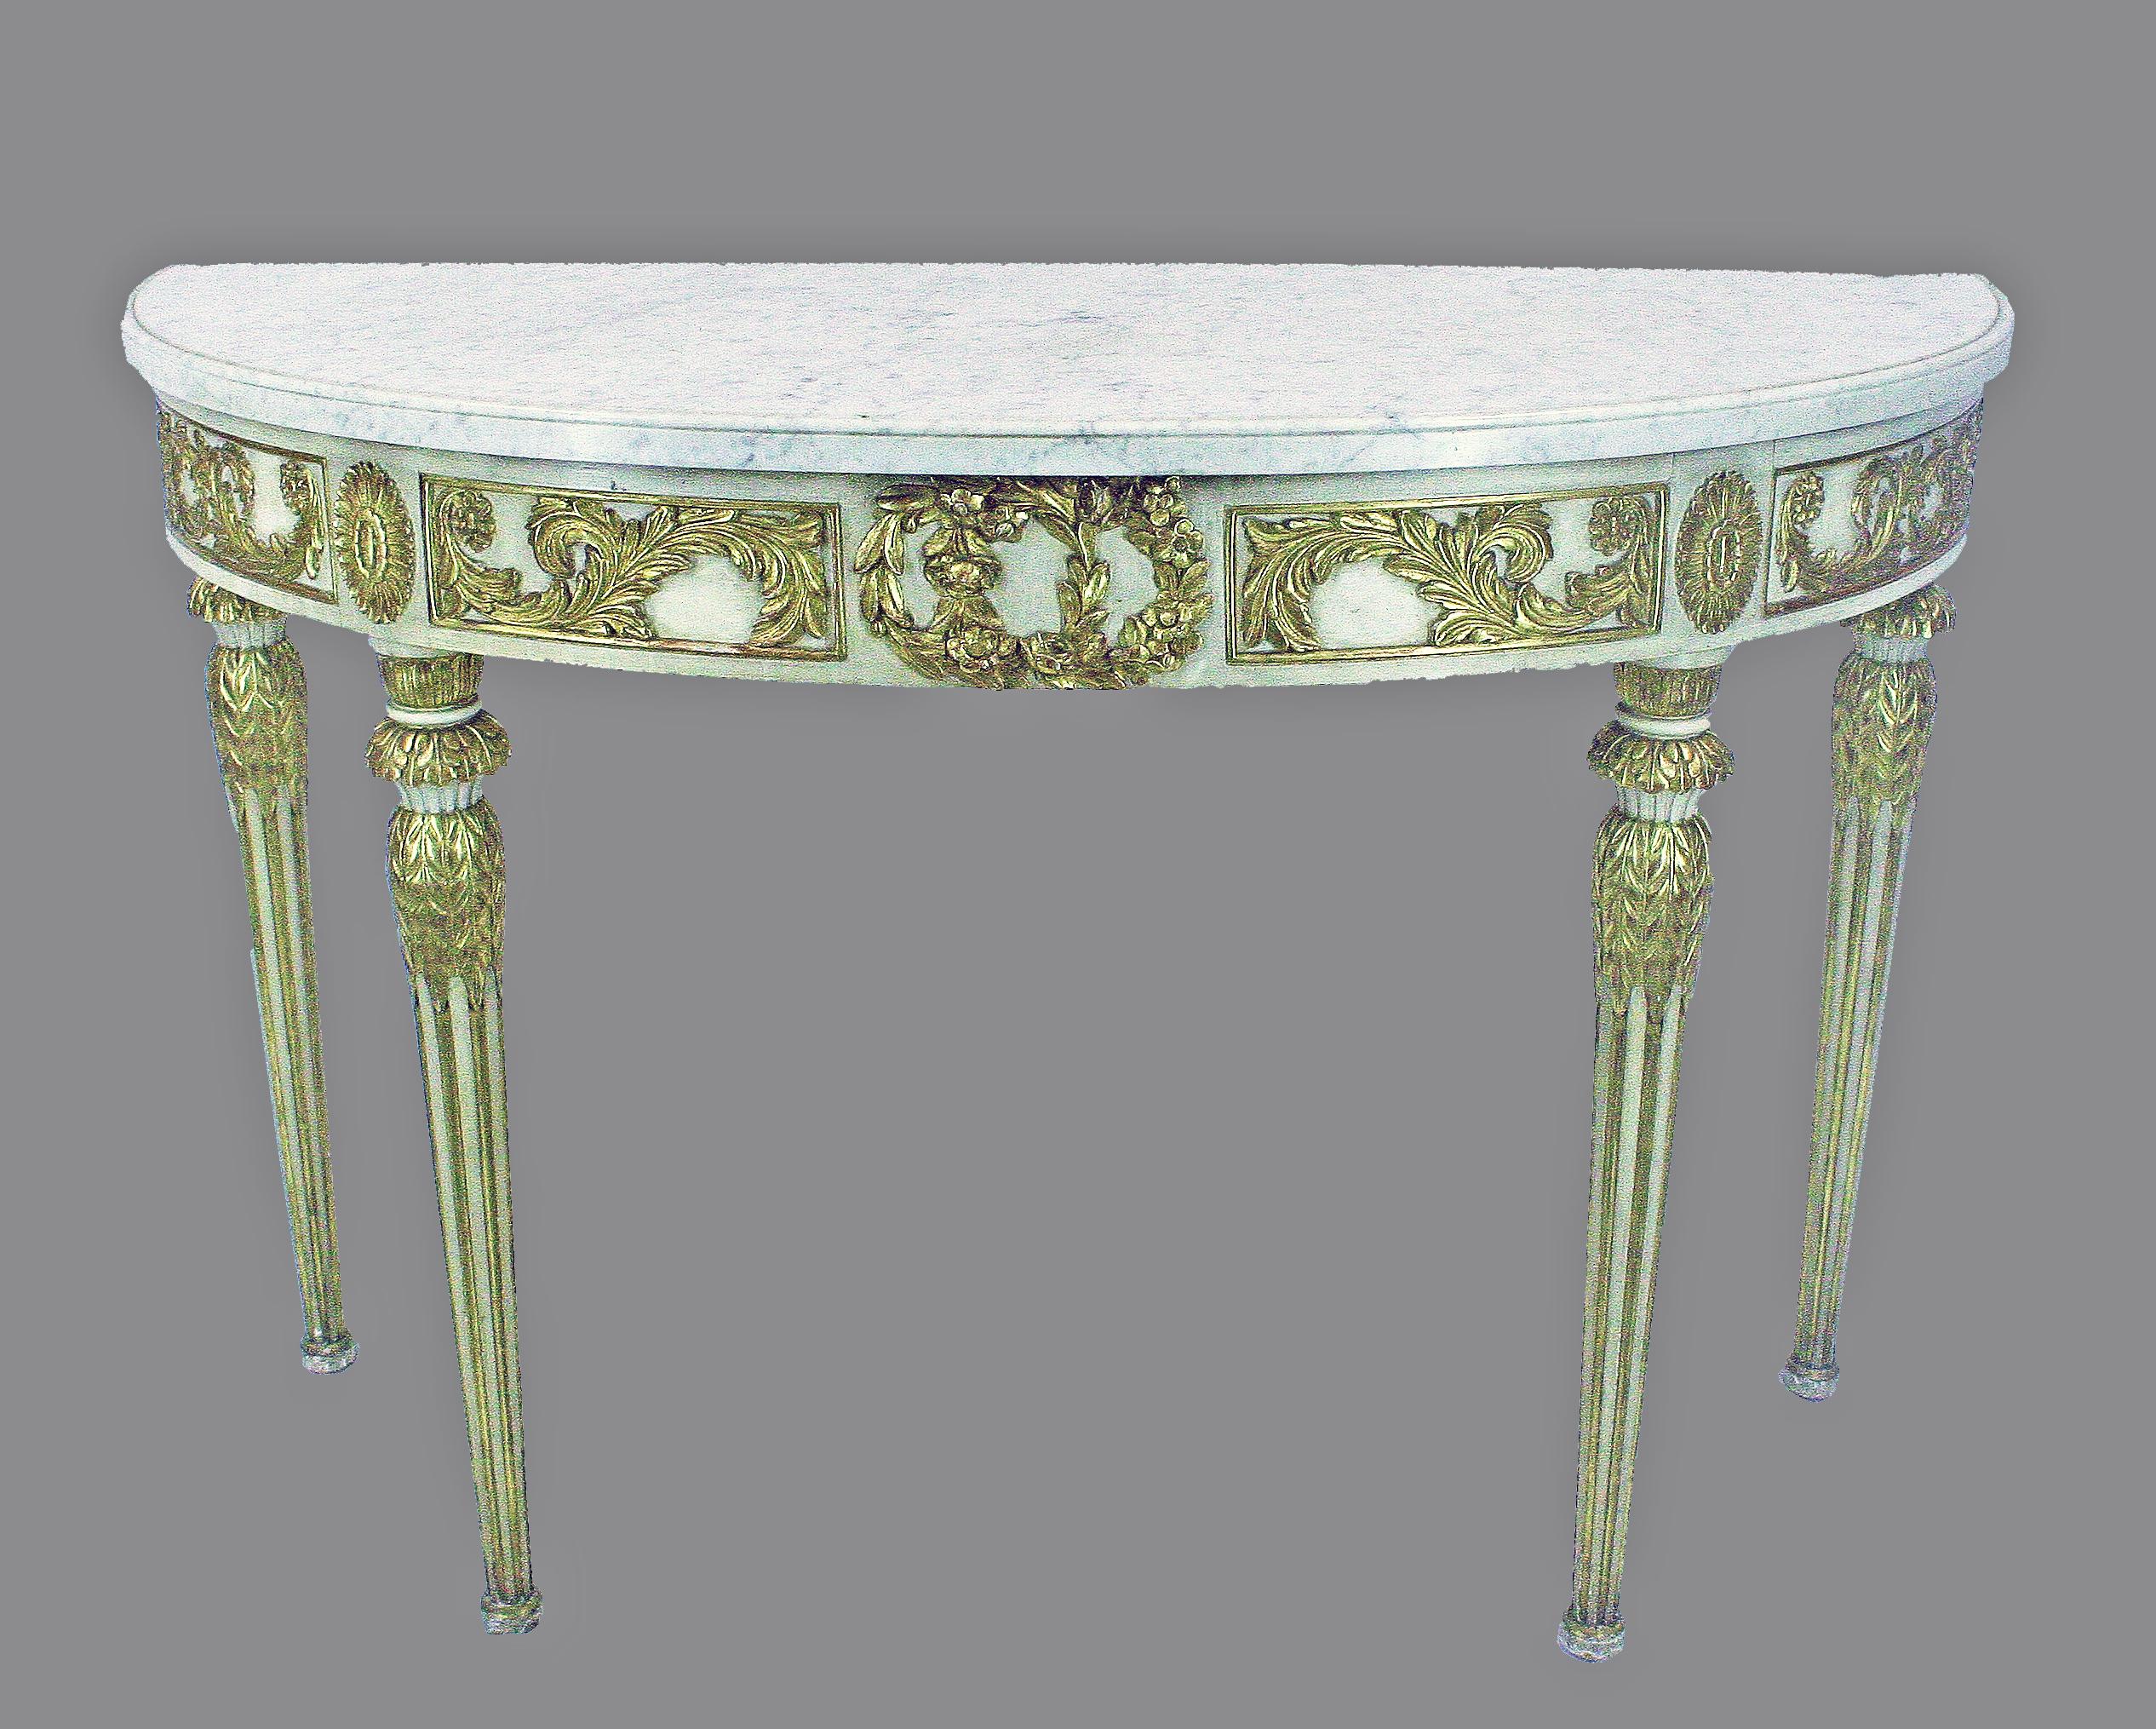 Mid-20th century argentine Empire Revival giltwood and marble demi-lune table/console by Maison Jansen

By: Maison Jansen
Material: marble, giltwood, paint, wood, lacquer
Technique: carved, gilt, hand-carved, hand-crafted, hand-painted,